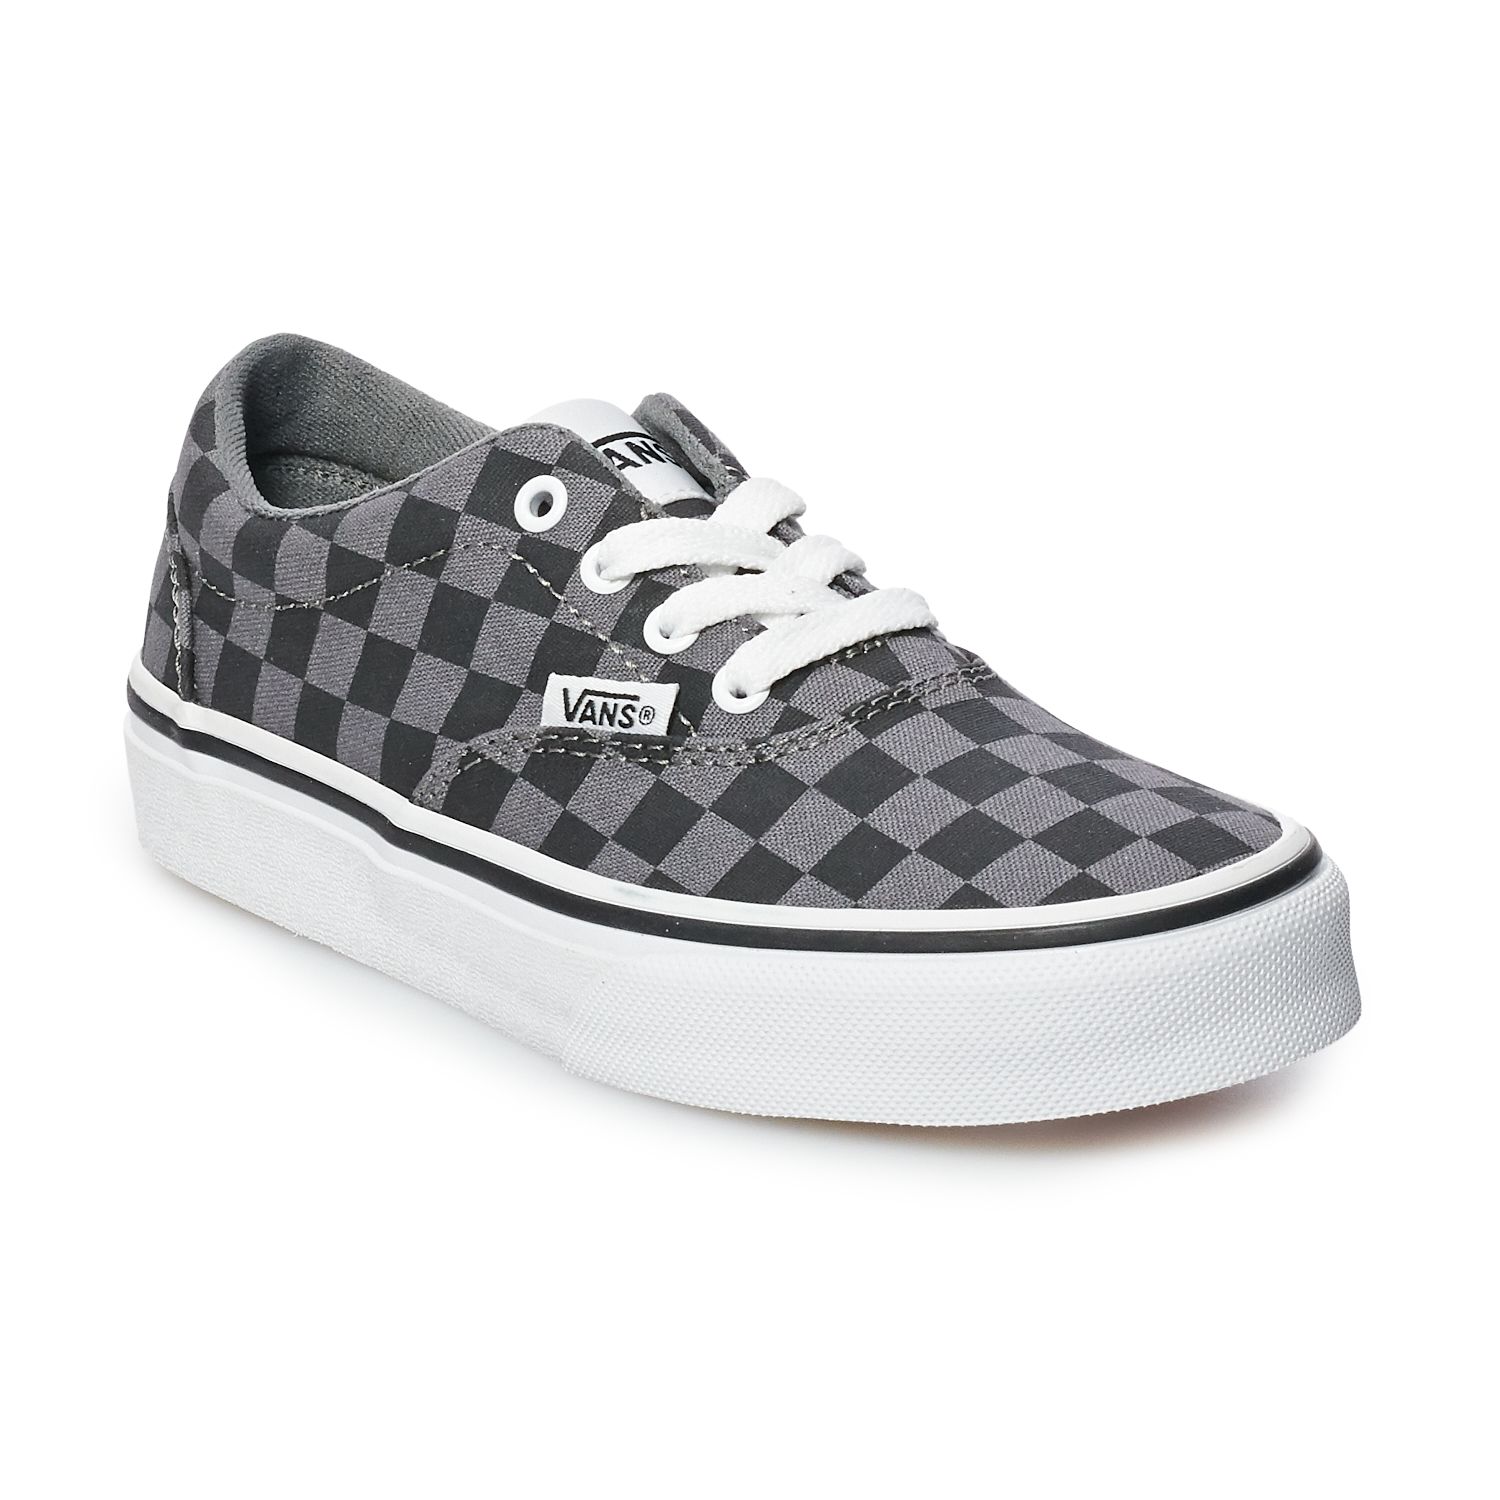 Vans® Doheny Kids' Checkered Skate Shoes